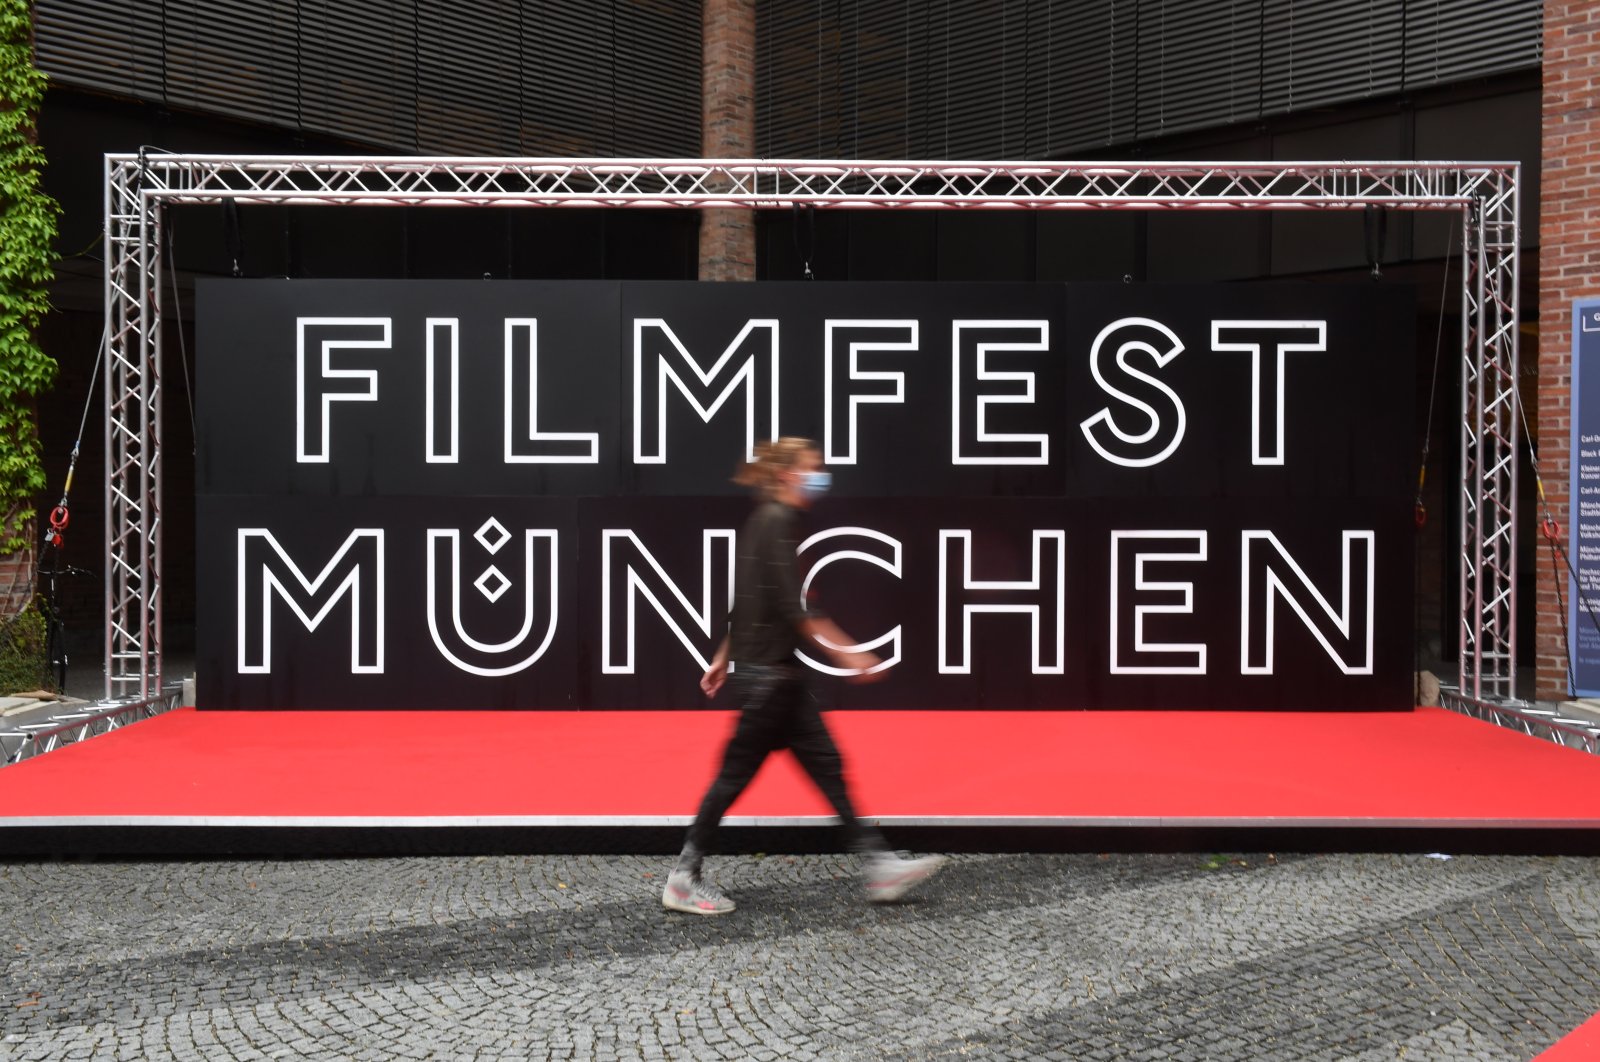 This year, 120 films from 52 countries will be shown at the Munich Film Festival. (DPA Photo)